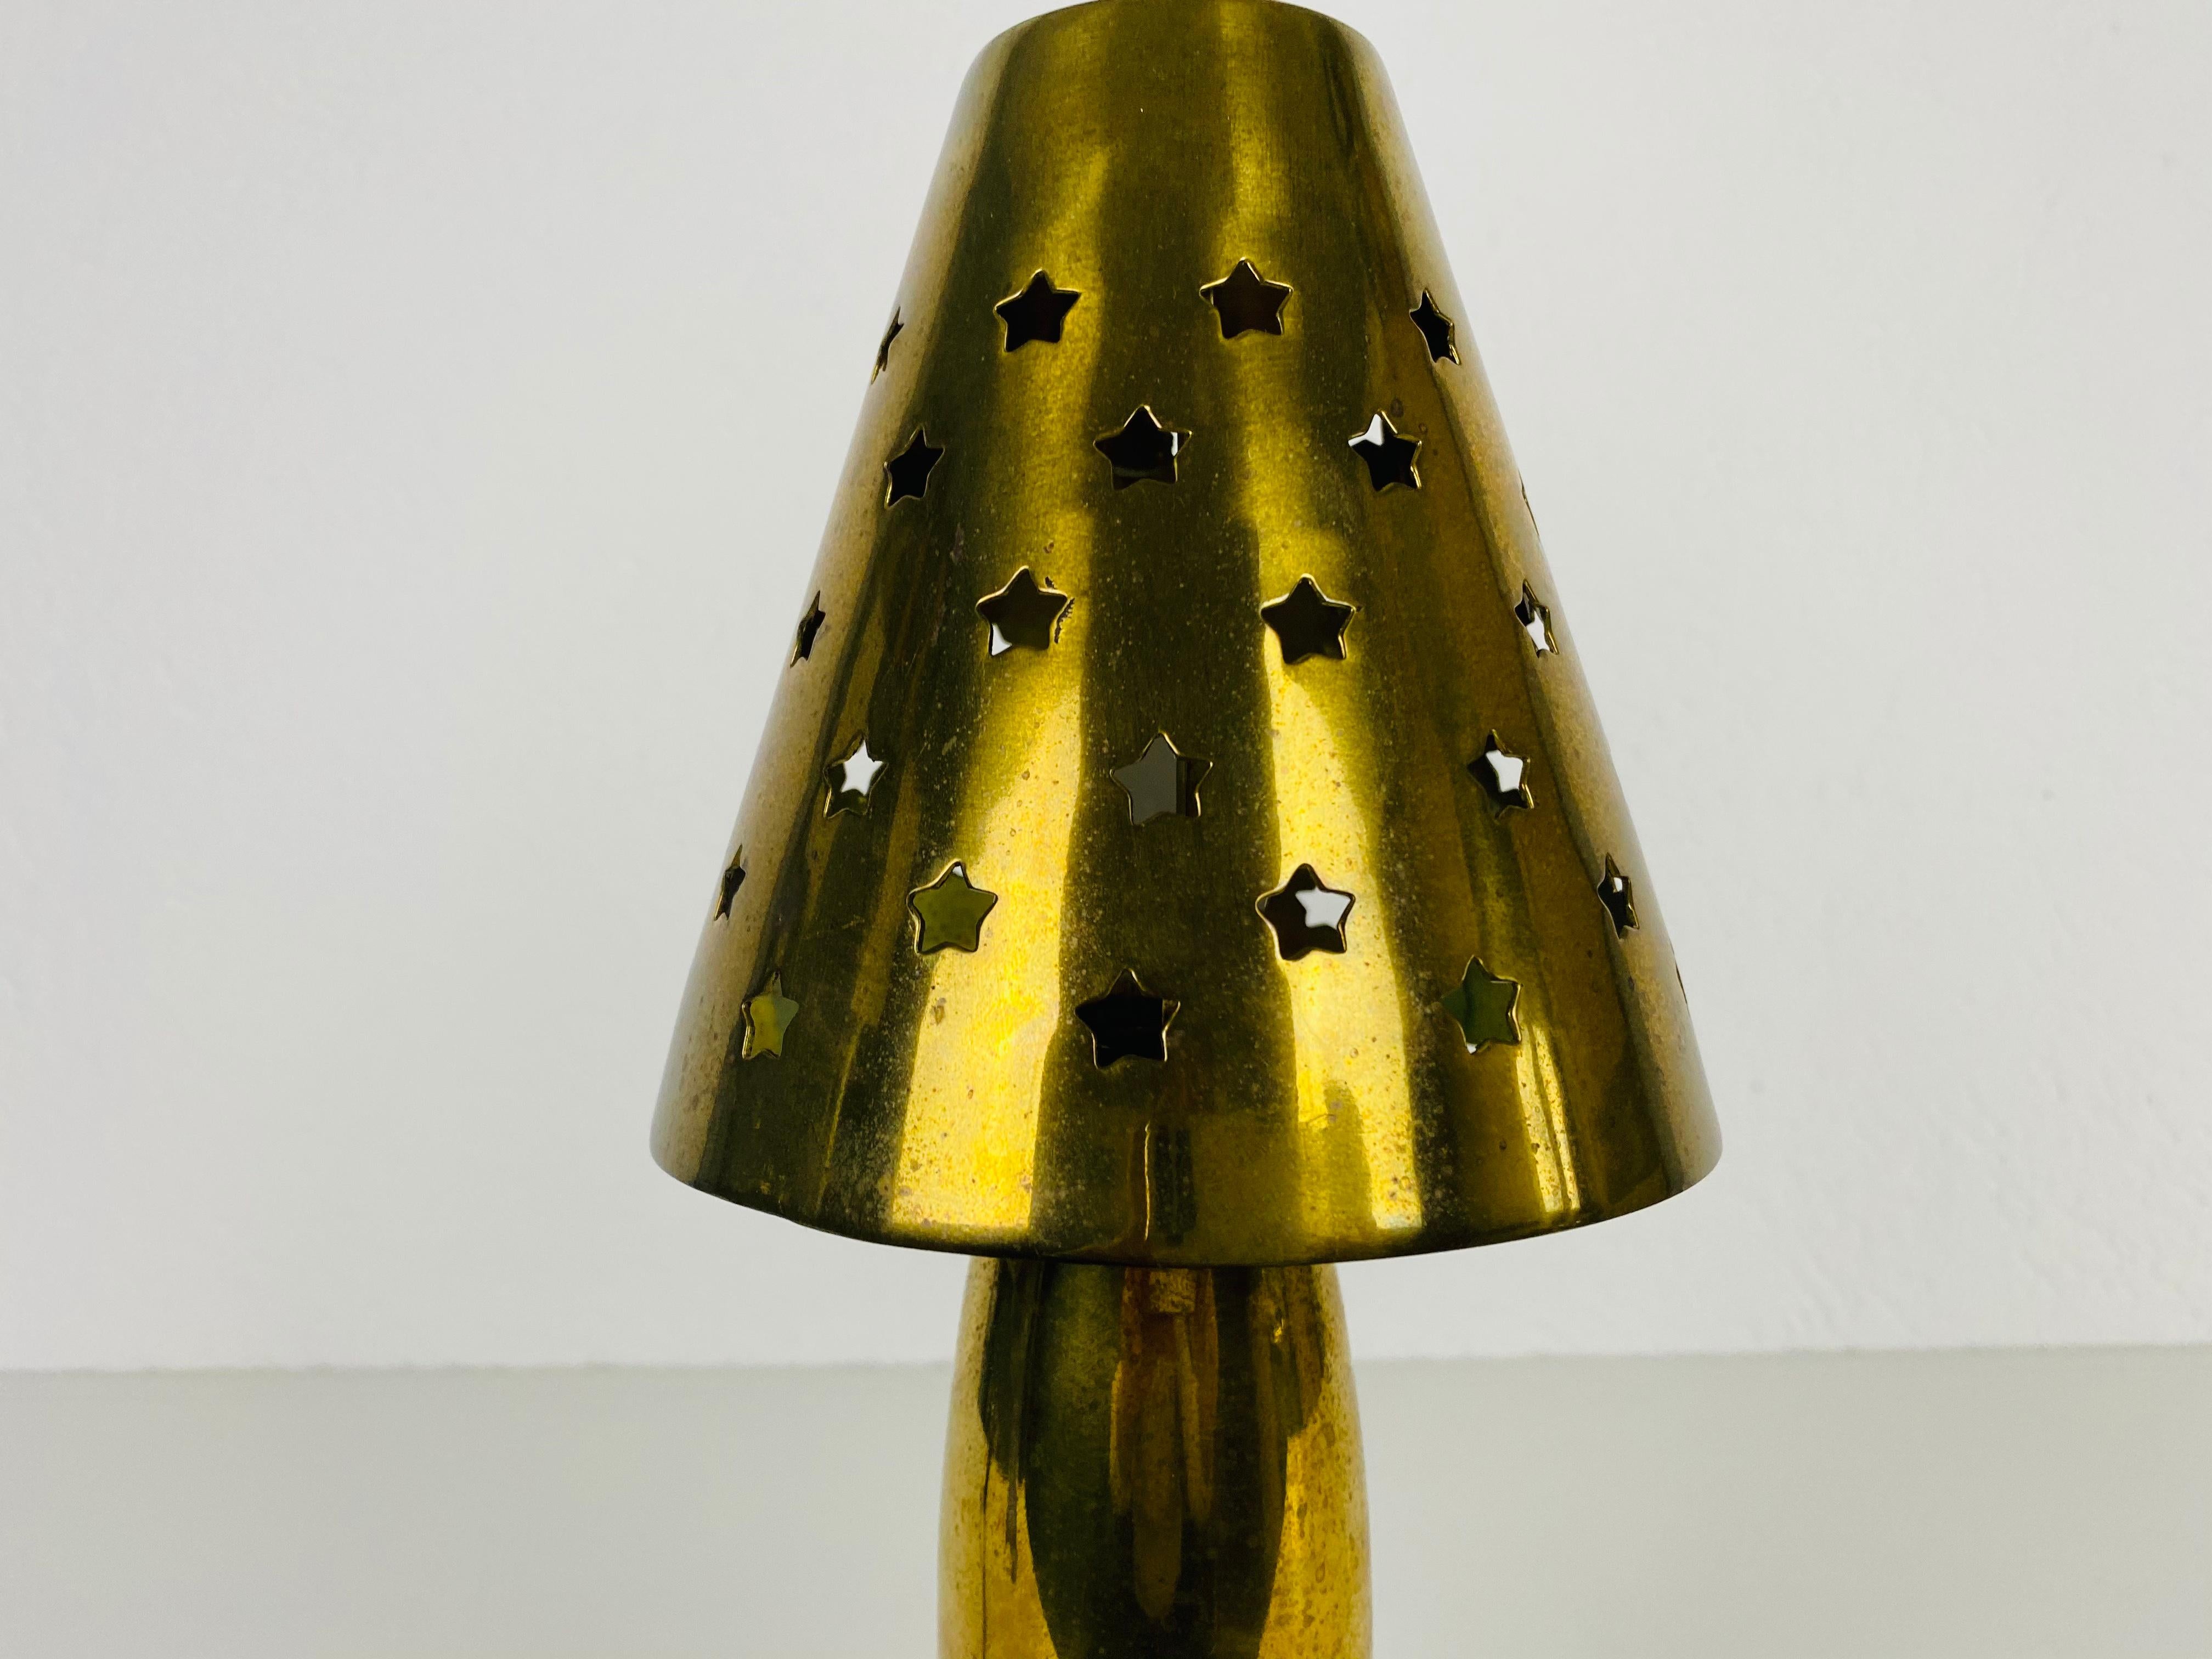 Midcentury Solid Brass Table Lamp by Studio Lambert, 1980s For Sale 4